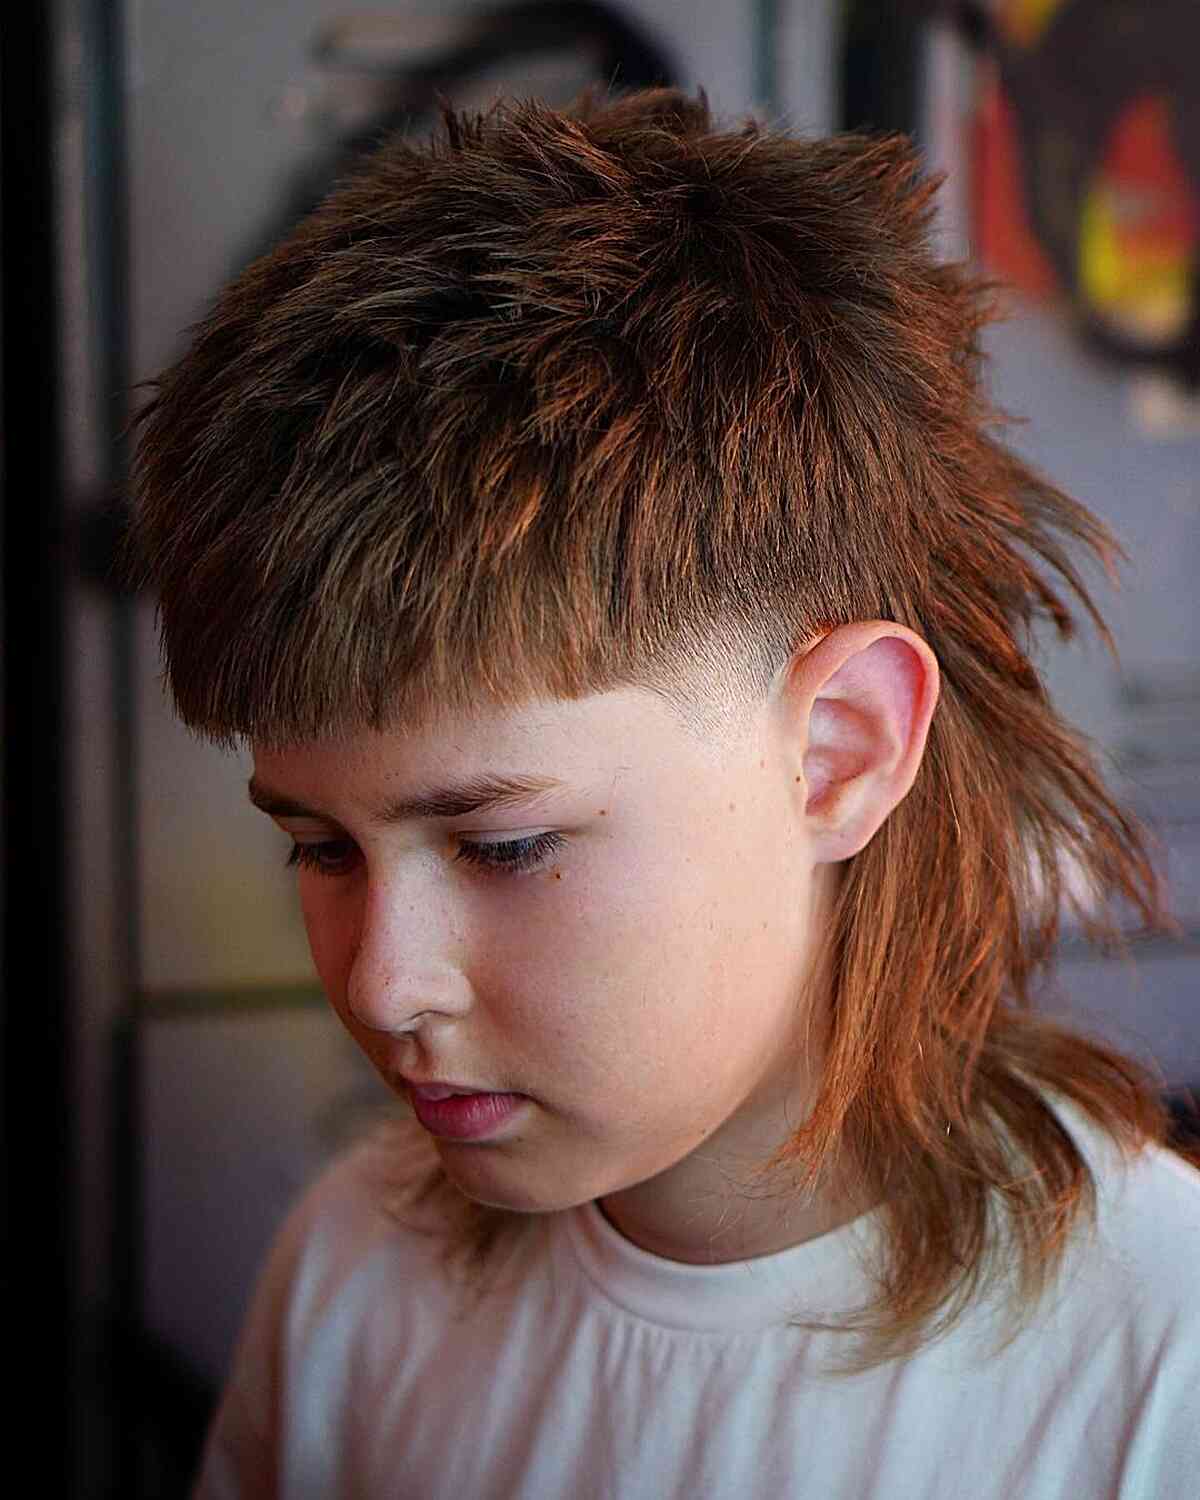 Coolest Back-to-School Mullet Haircut for Boys with Long Hair